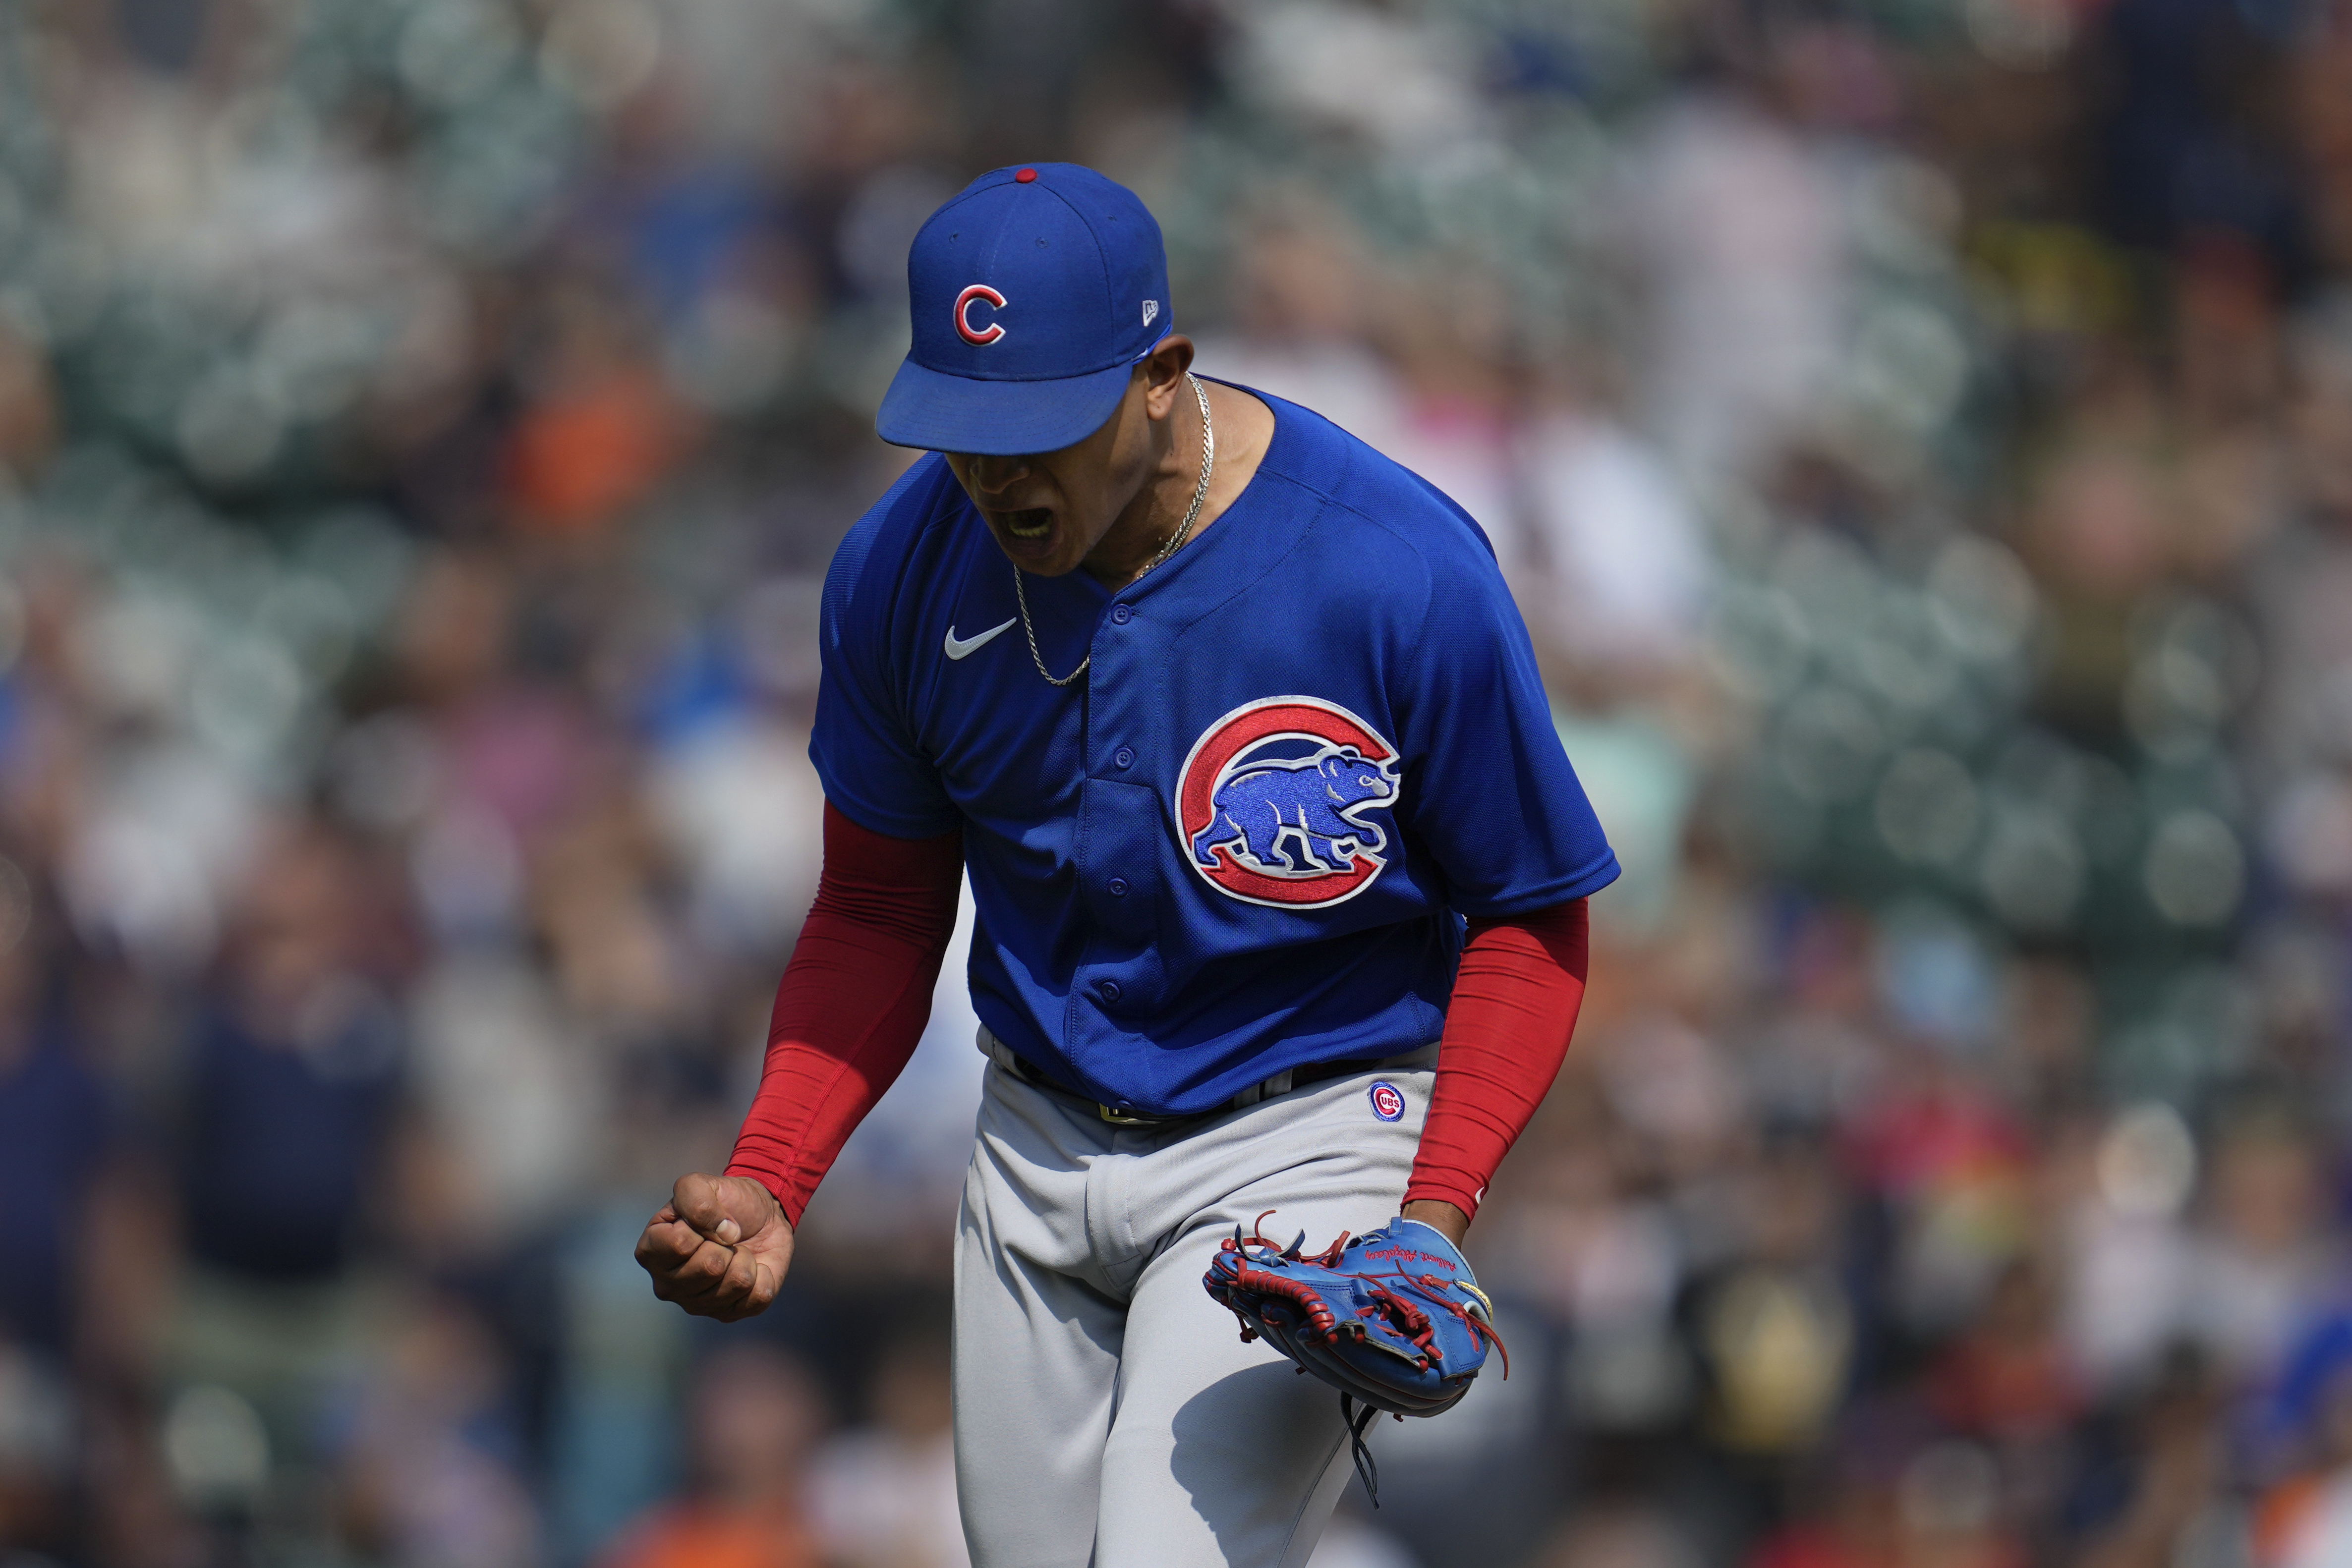 Chicago Cubs eye standings in tight NL wild-card race